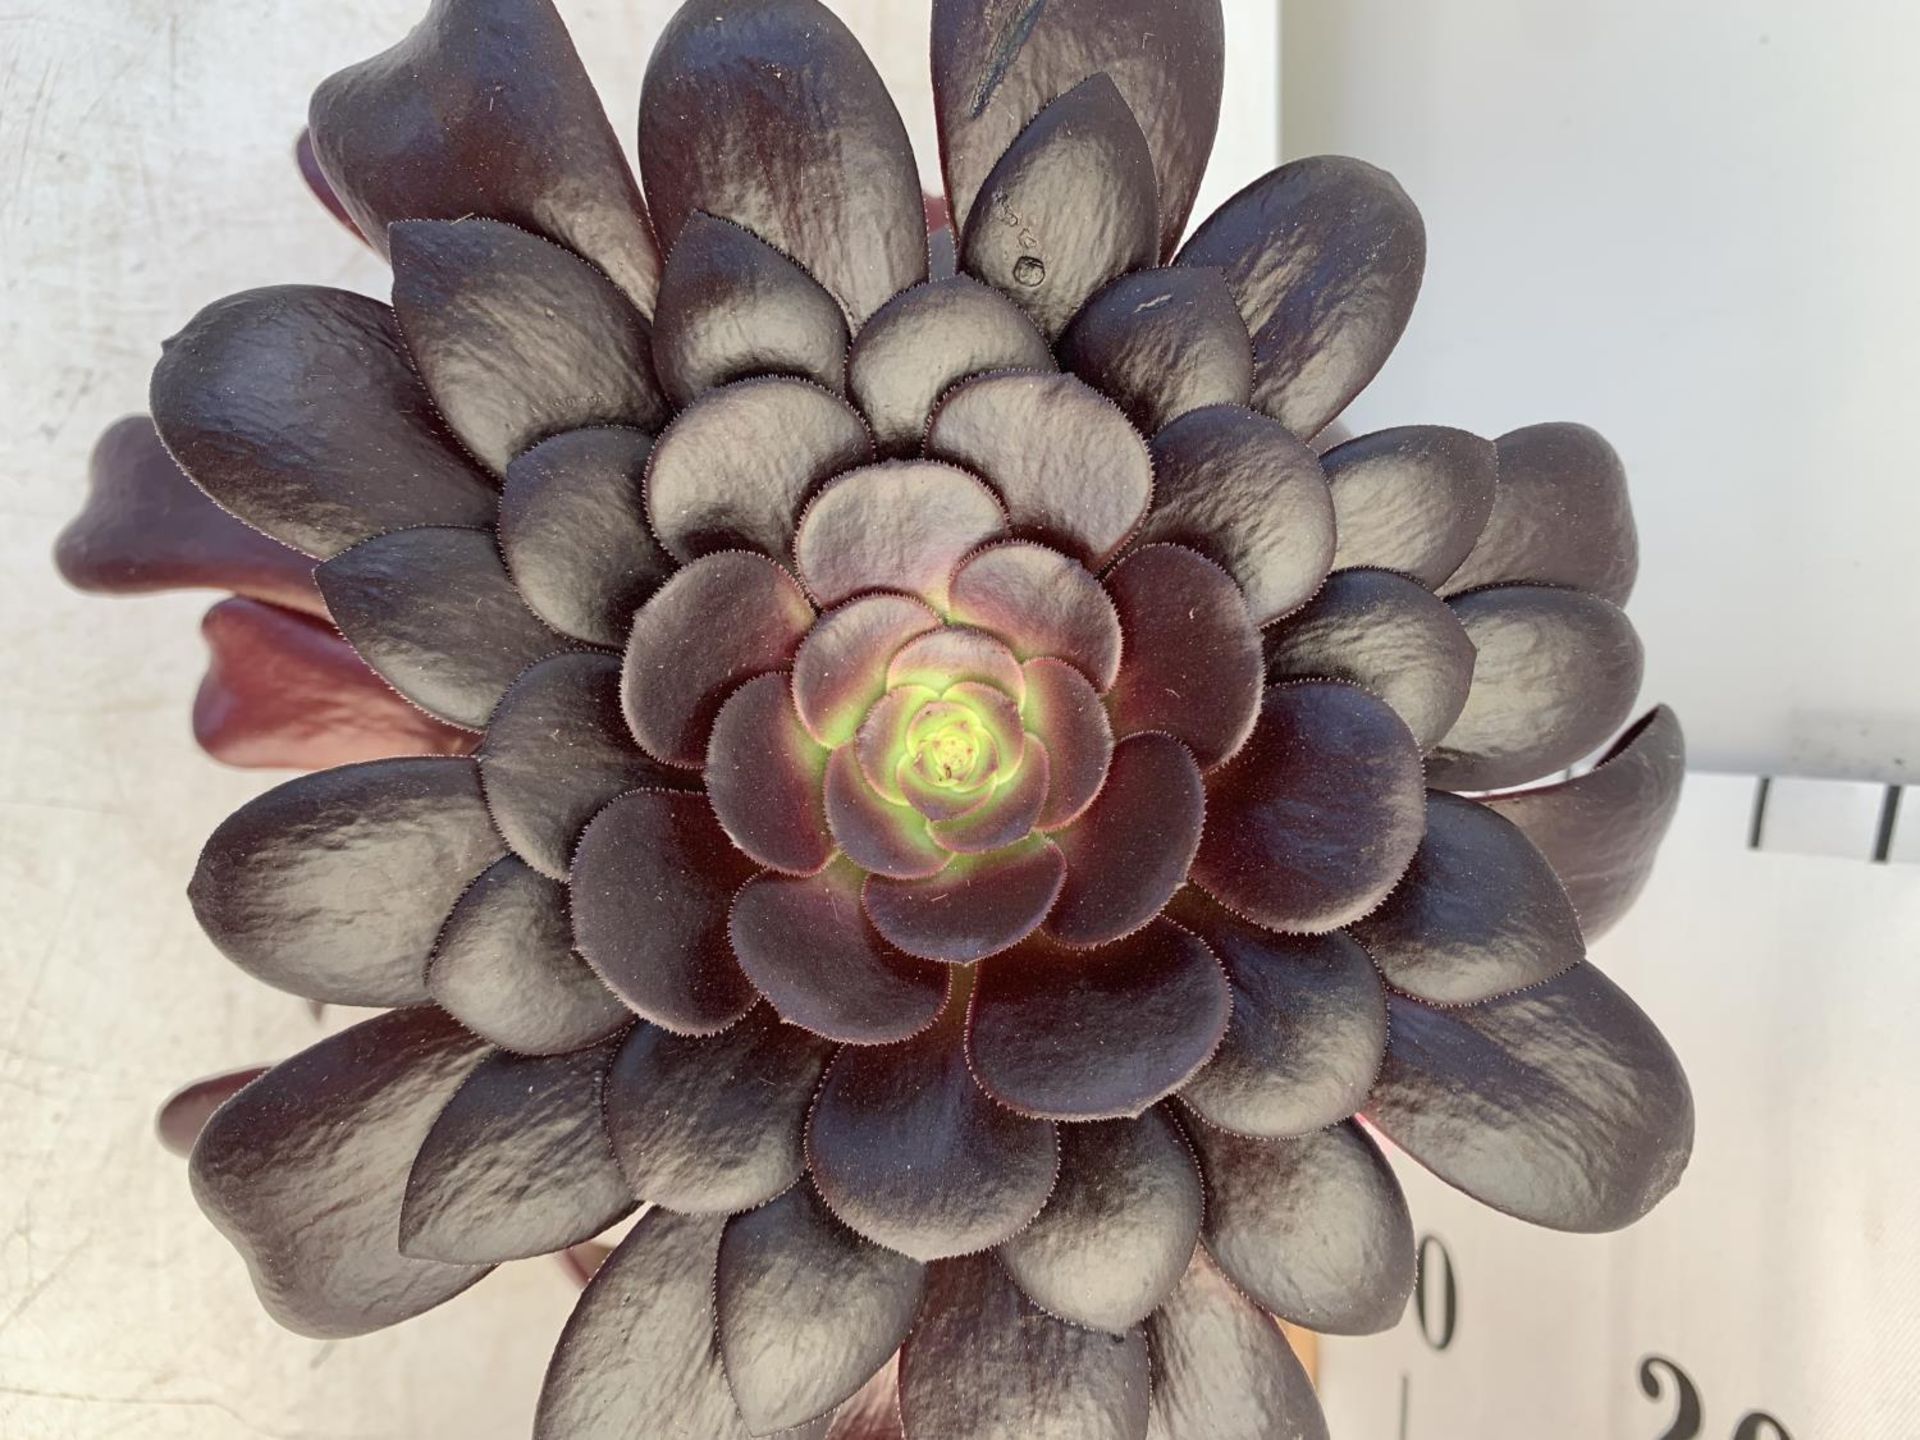 TWO AEONIUM ARBOREUM VELOURS IN 1 LTR POTS 25CM TALL PLUS VAT TO BE SOLD FOR THE TWO - Image 6 of 6